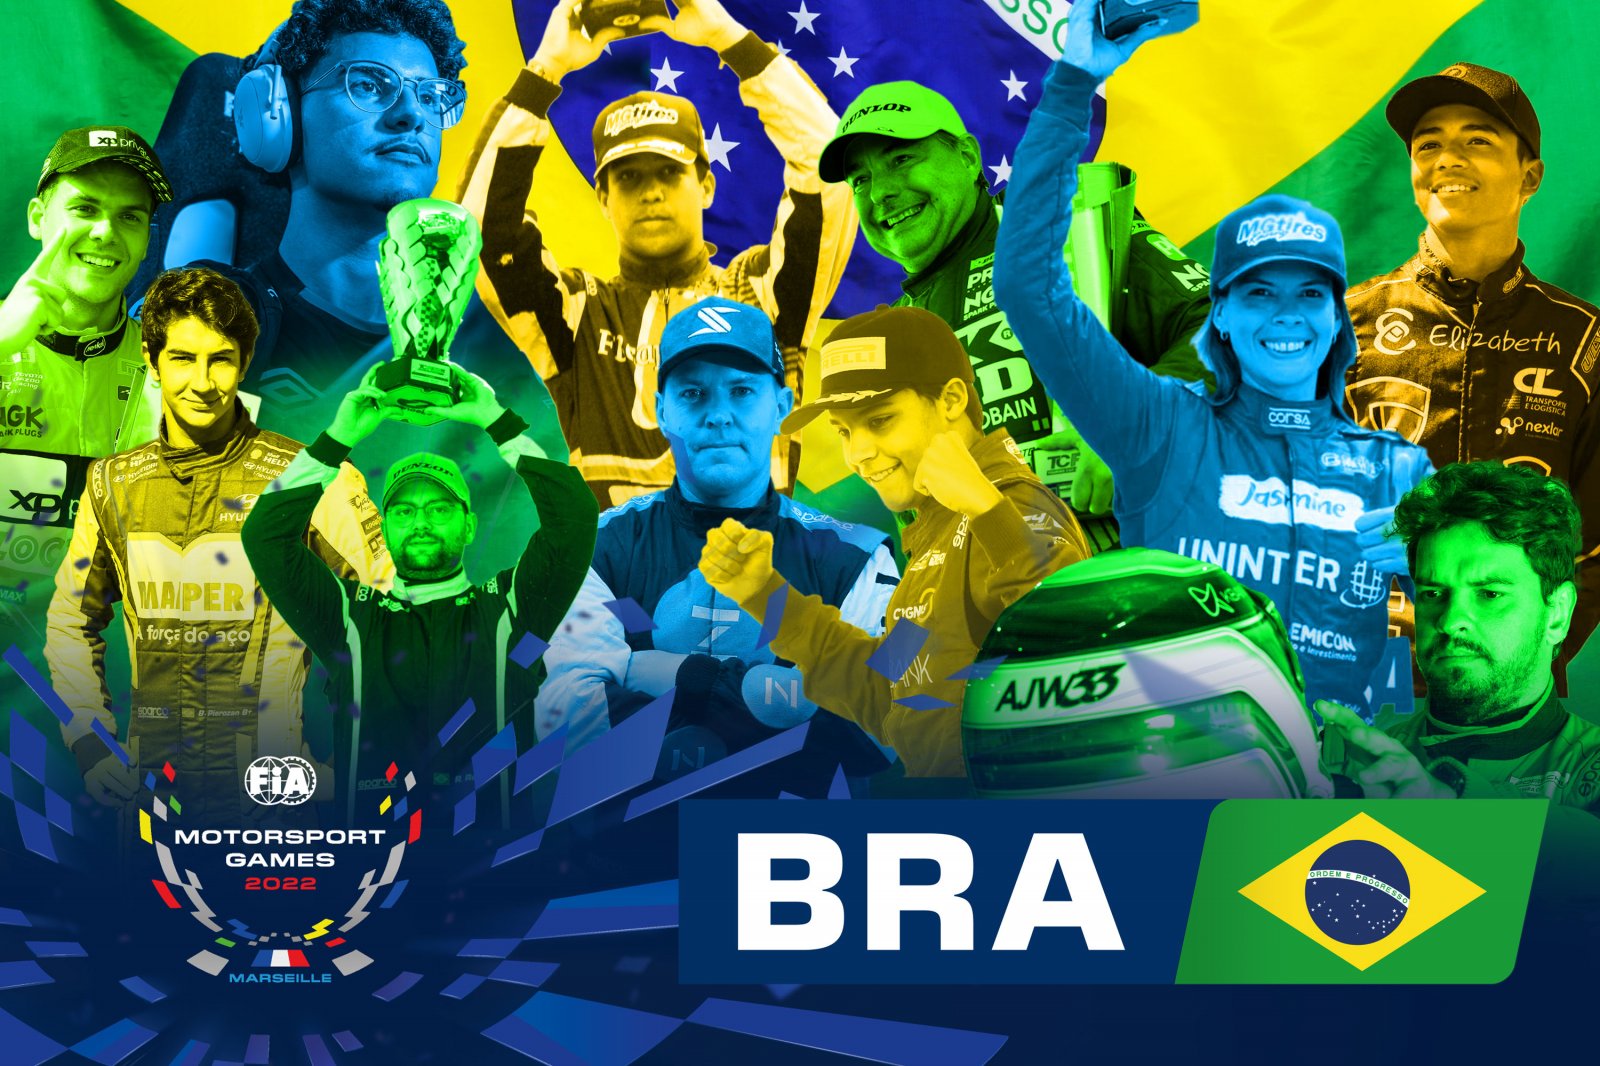 Brazil is back with 11-strong team for France